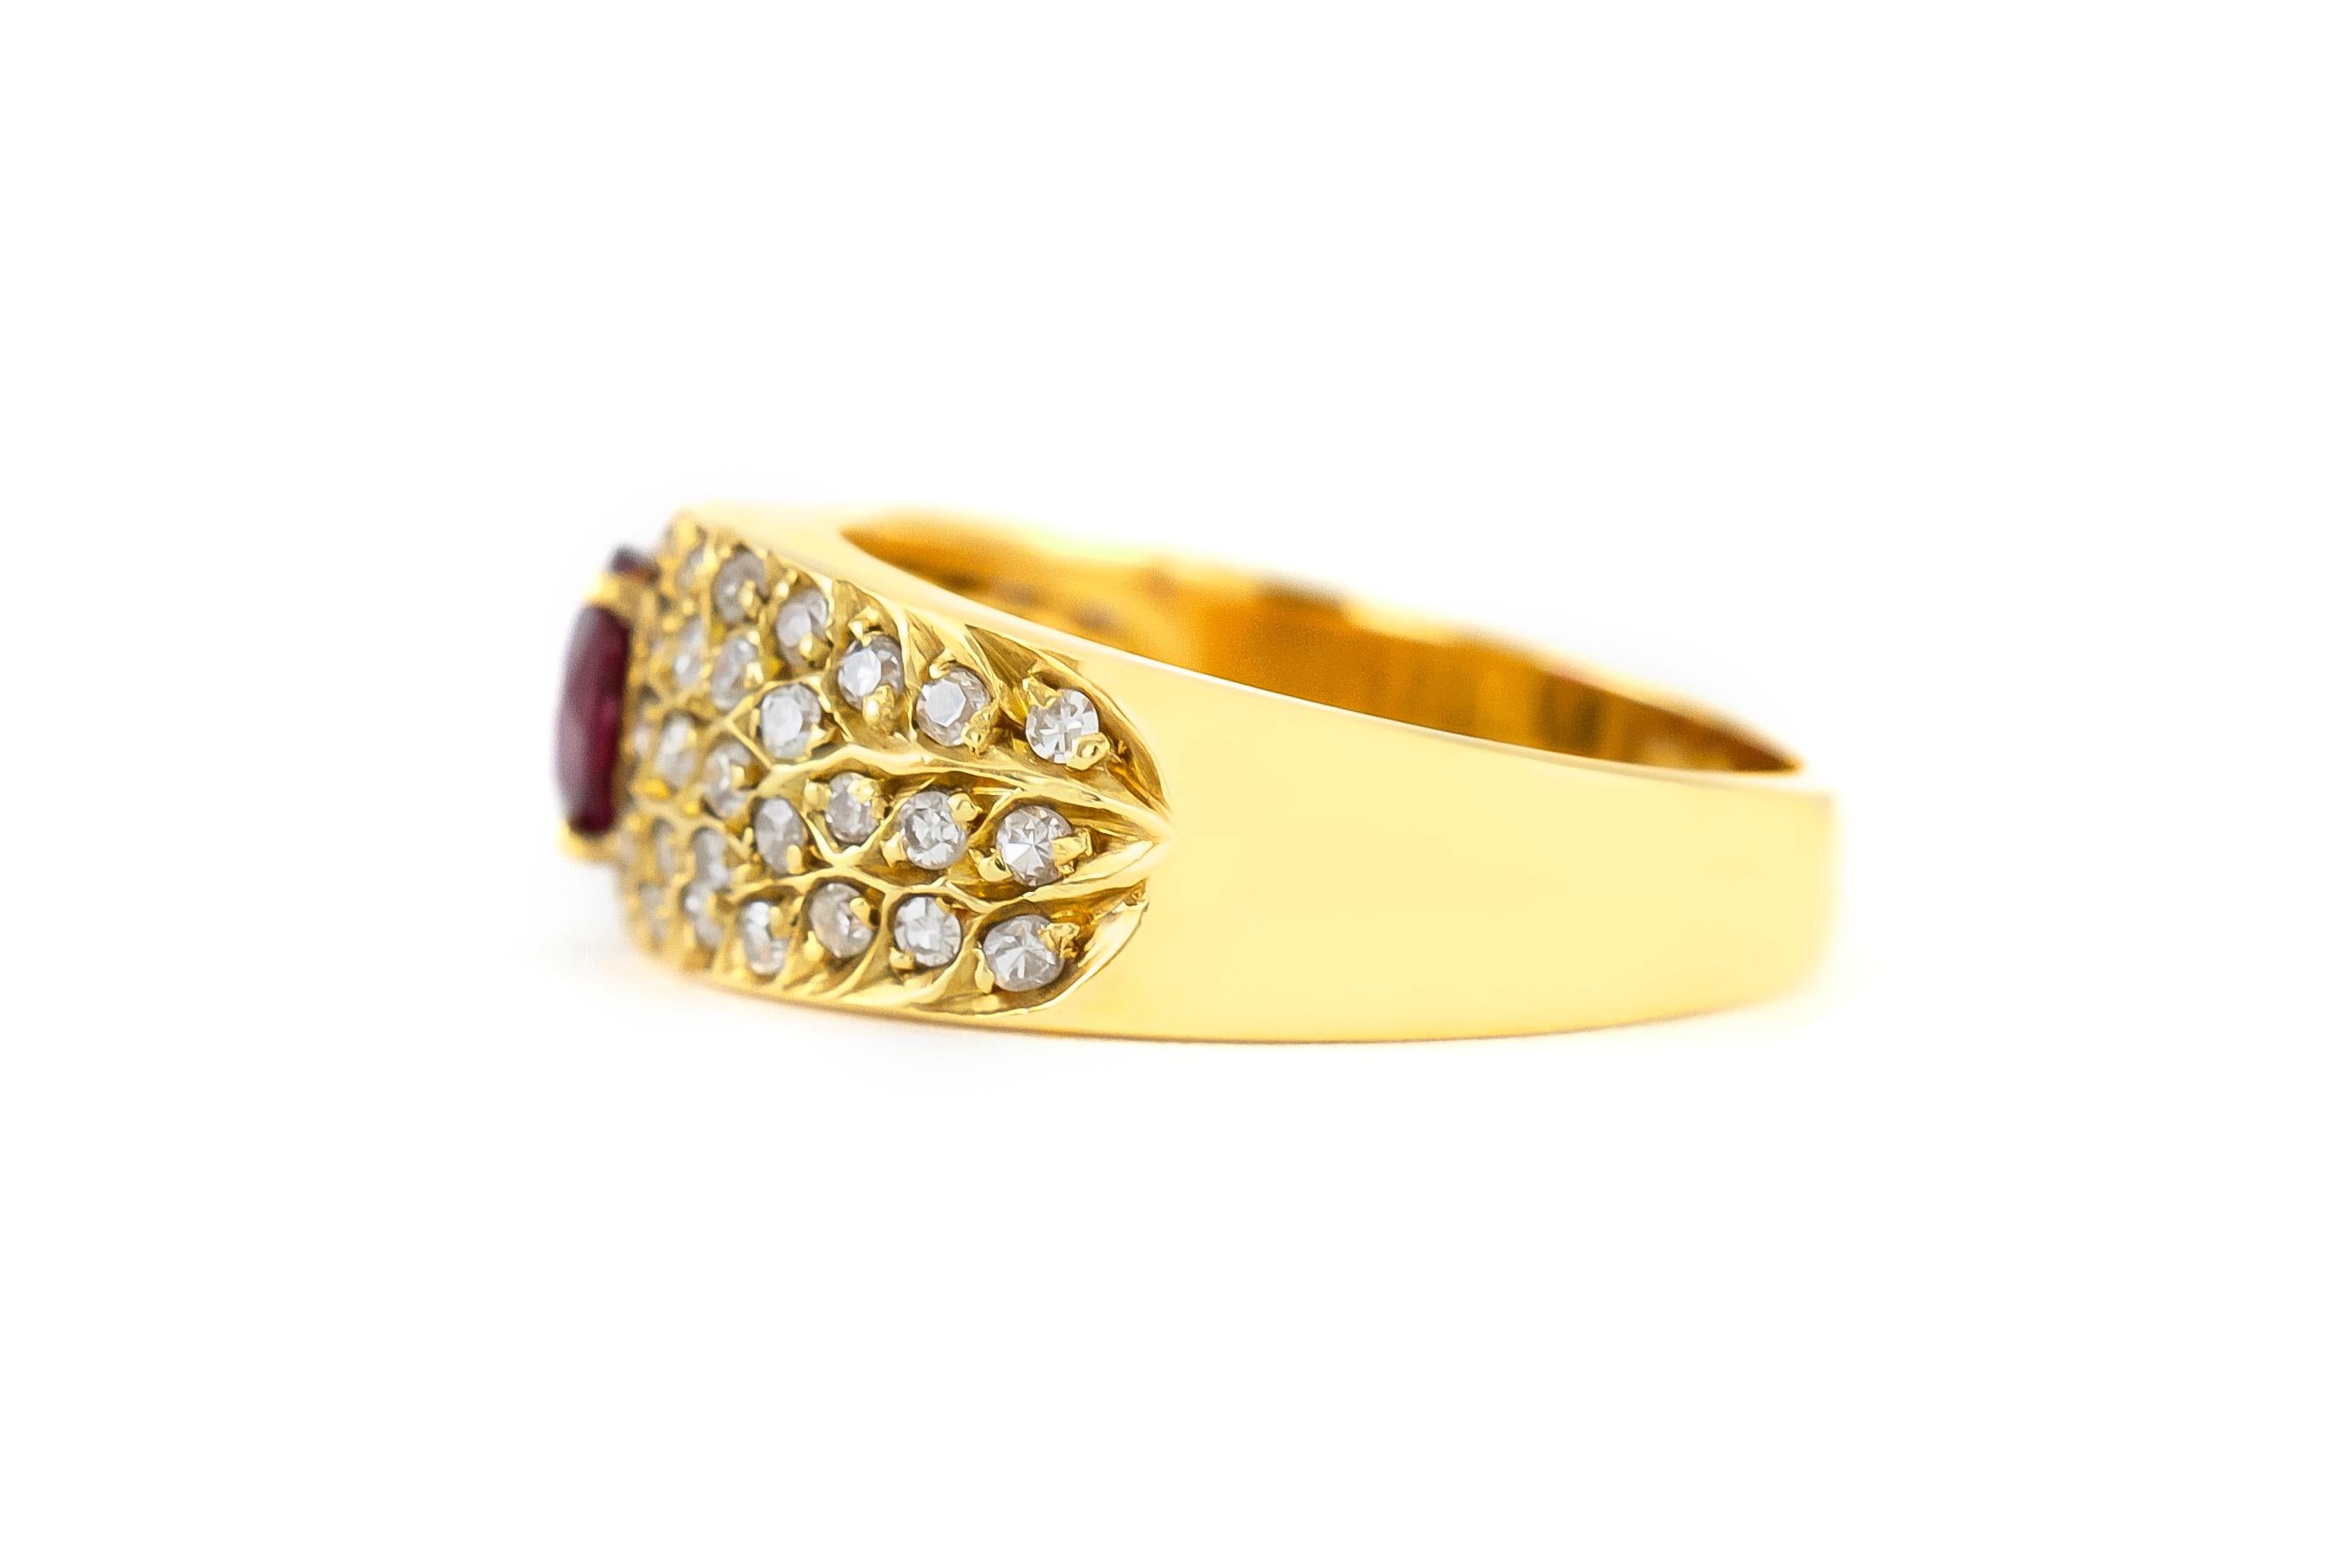 The ring is finely crafted in 198k yellow gold with center stone ruby weighing approximately total of 0.75 carat and diamonds weighing approximately total of 1.00 carat.
Total weight of the ring : 3.8 dwt
Circa 1980.